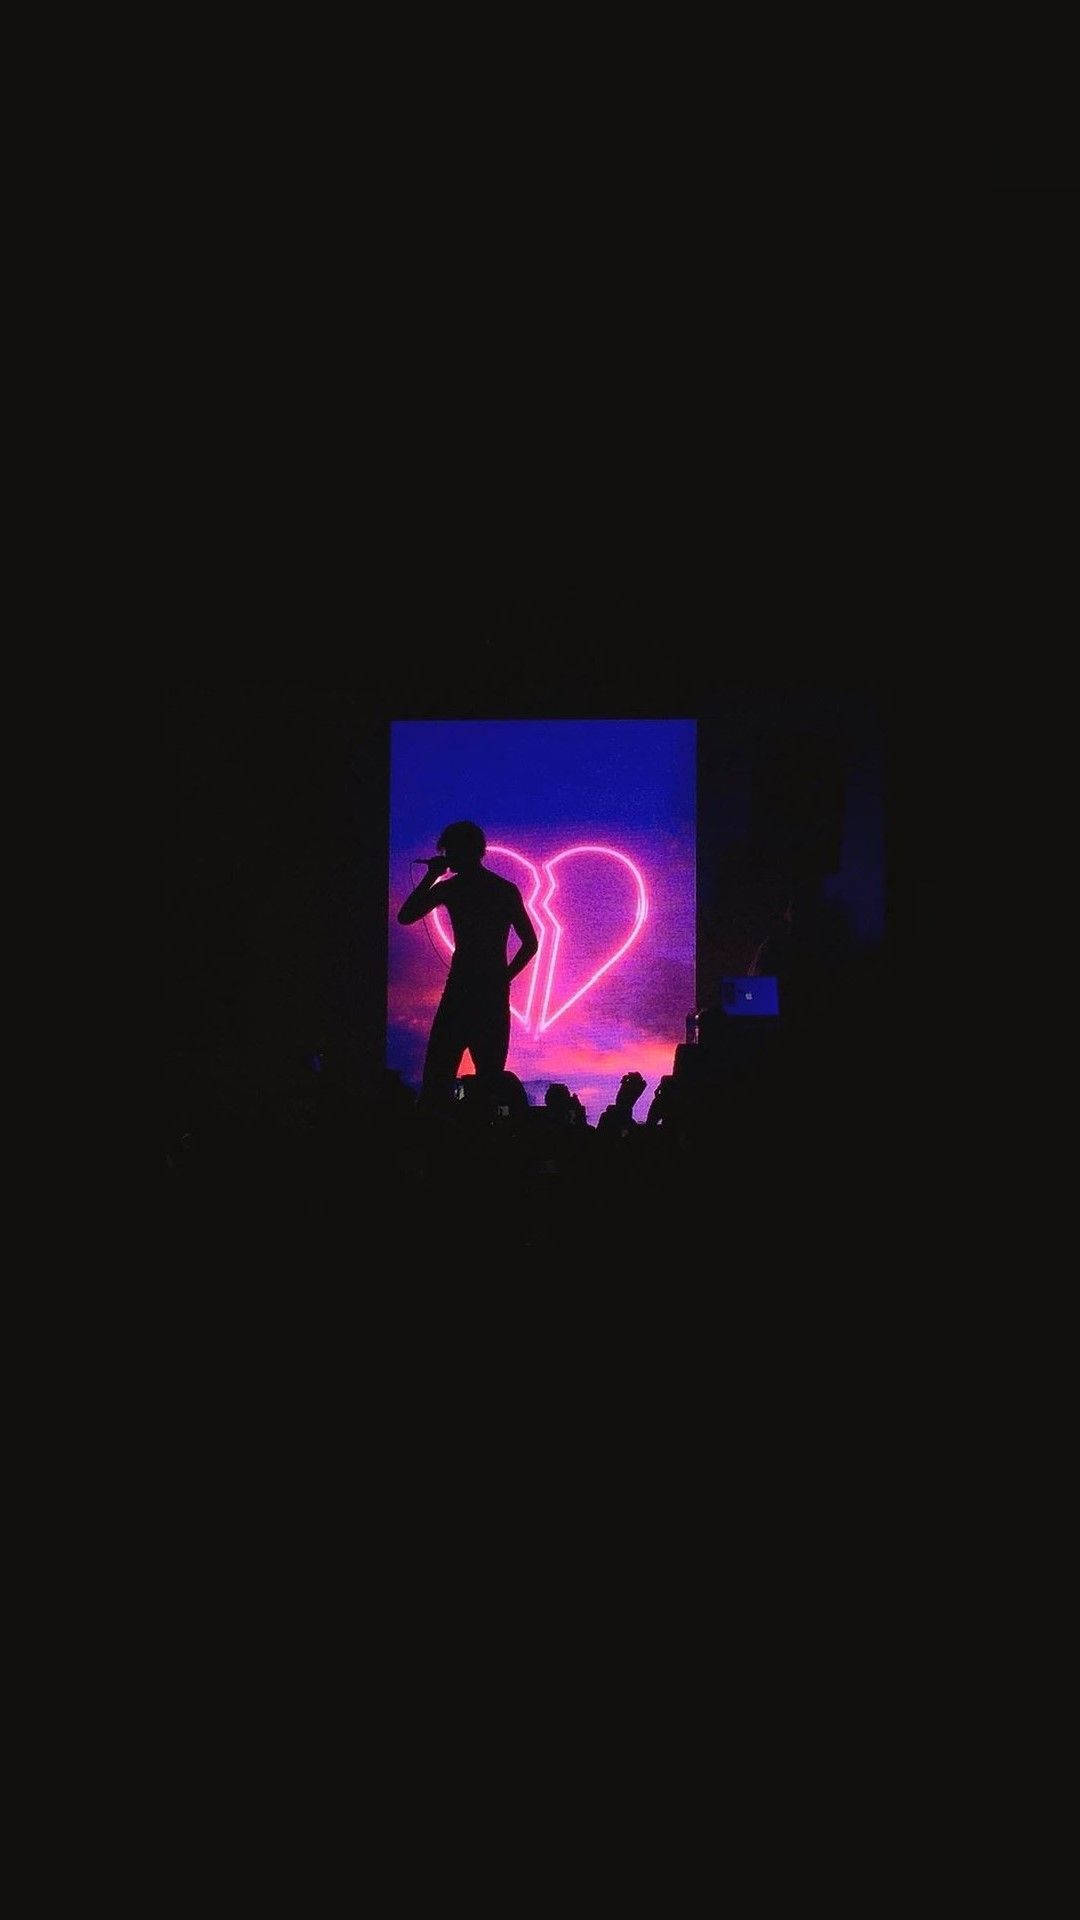 The Silhouette Of An Incredible Show By Lil Peep Wallpaper